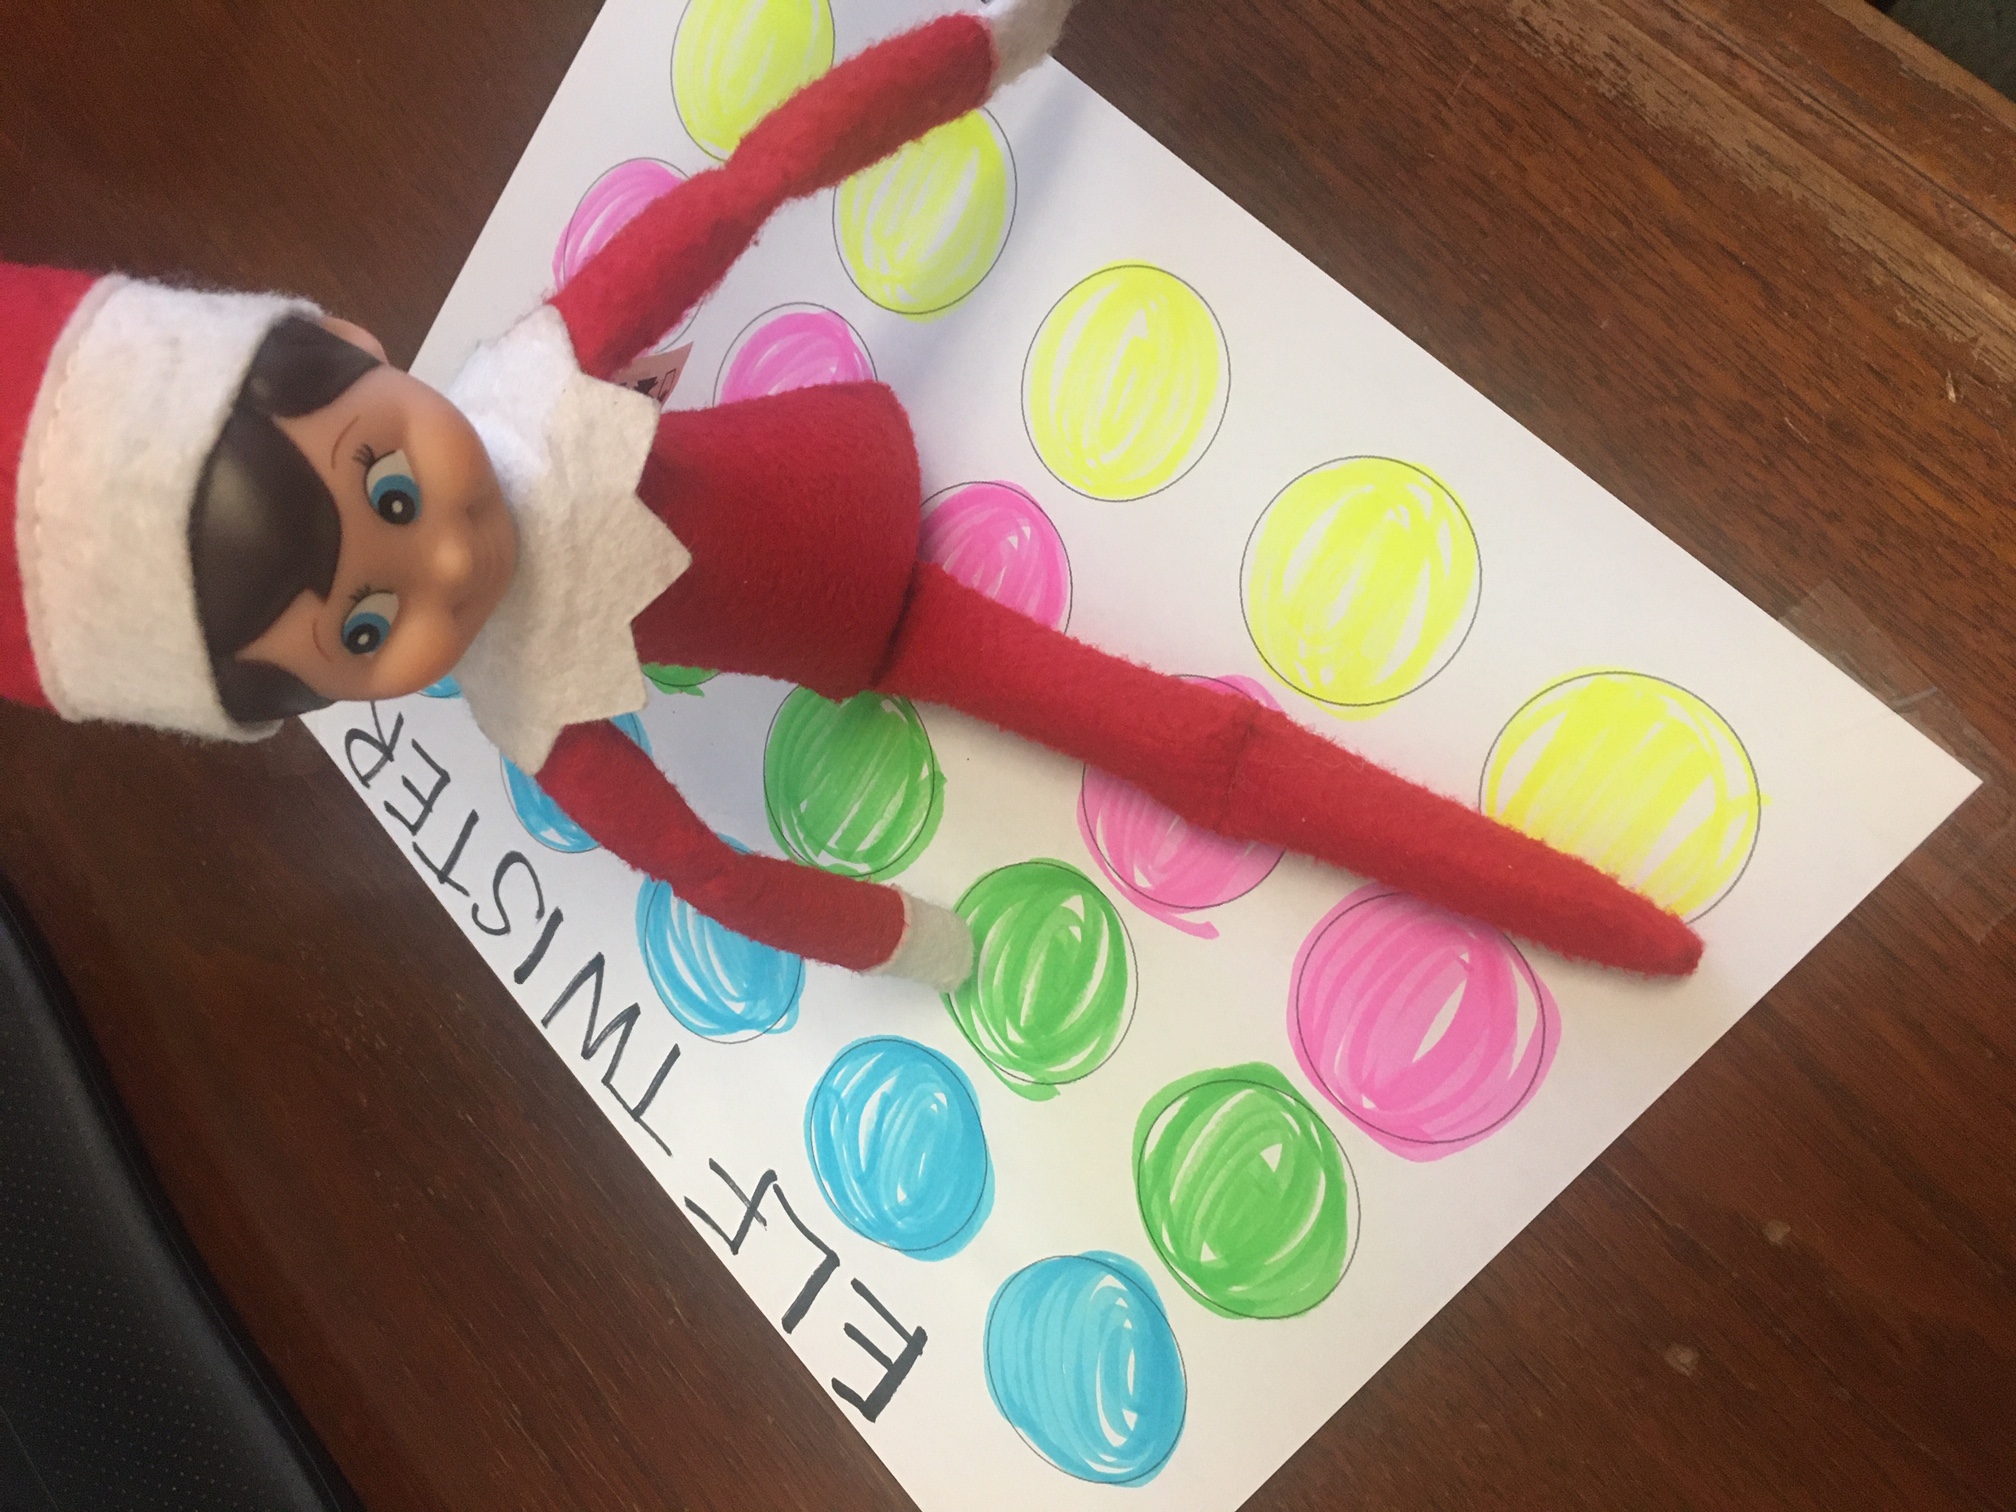 Fun and Games with our Health Elf - Orchard Hill Rehabilitation and ...